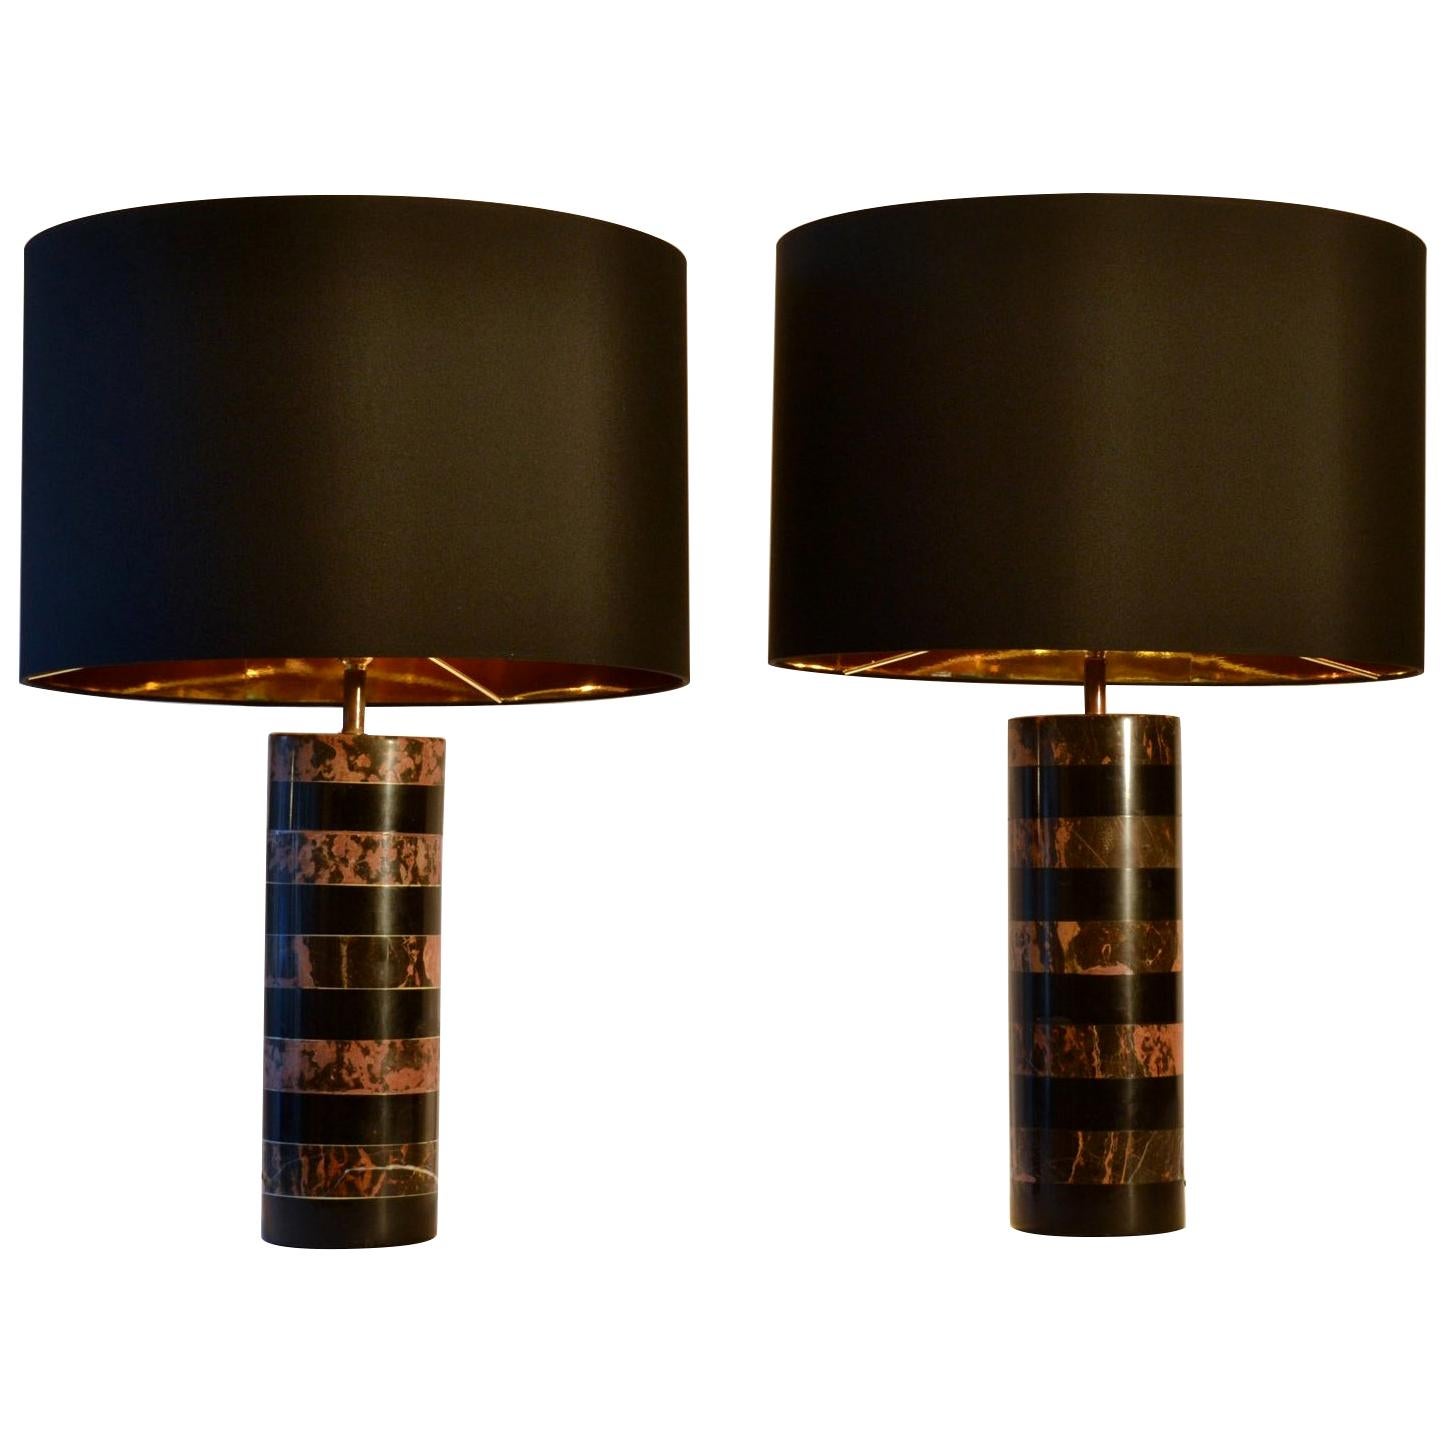 Pair of Marble Cylinder Table Lamps Old Pink and Black 1970s French